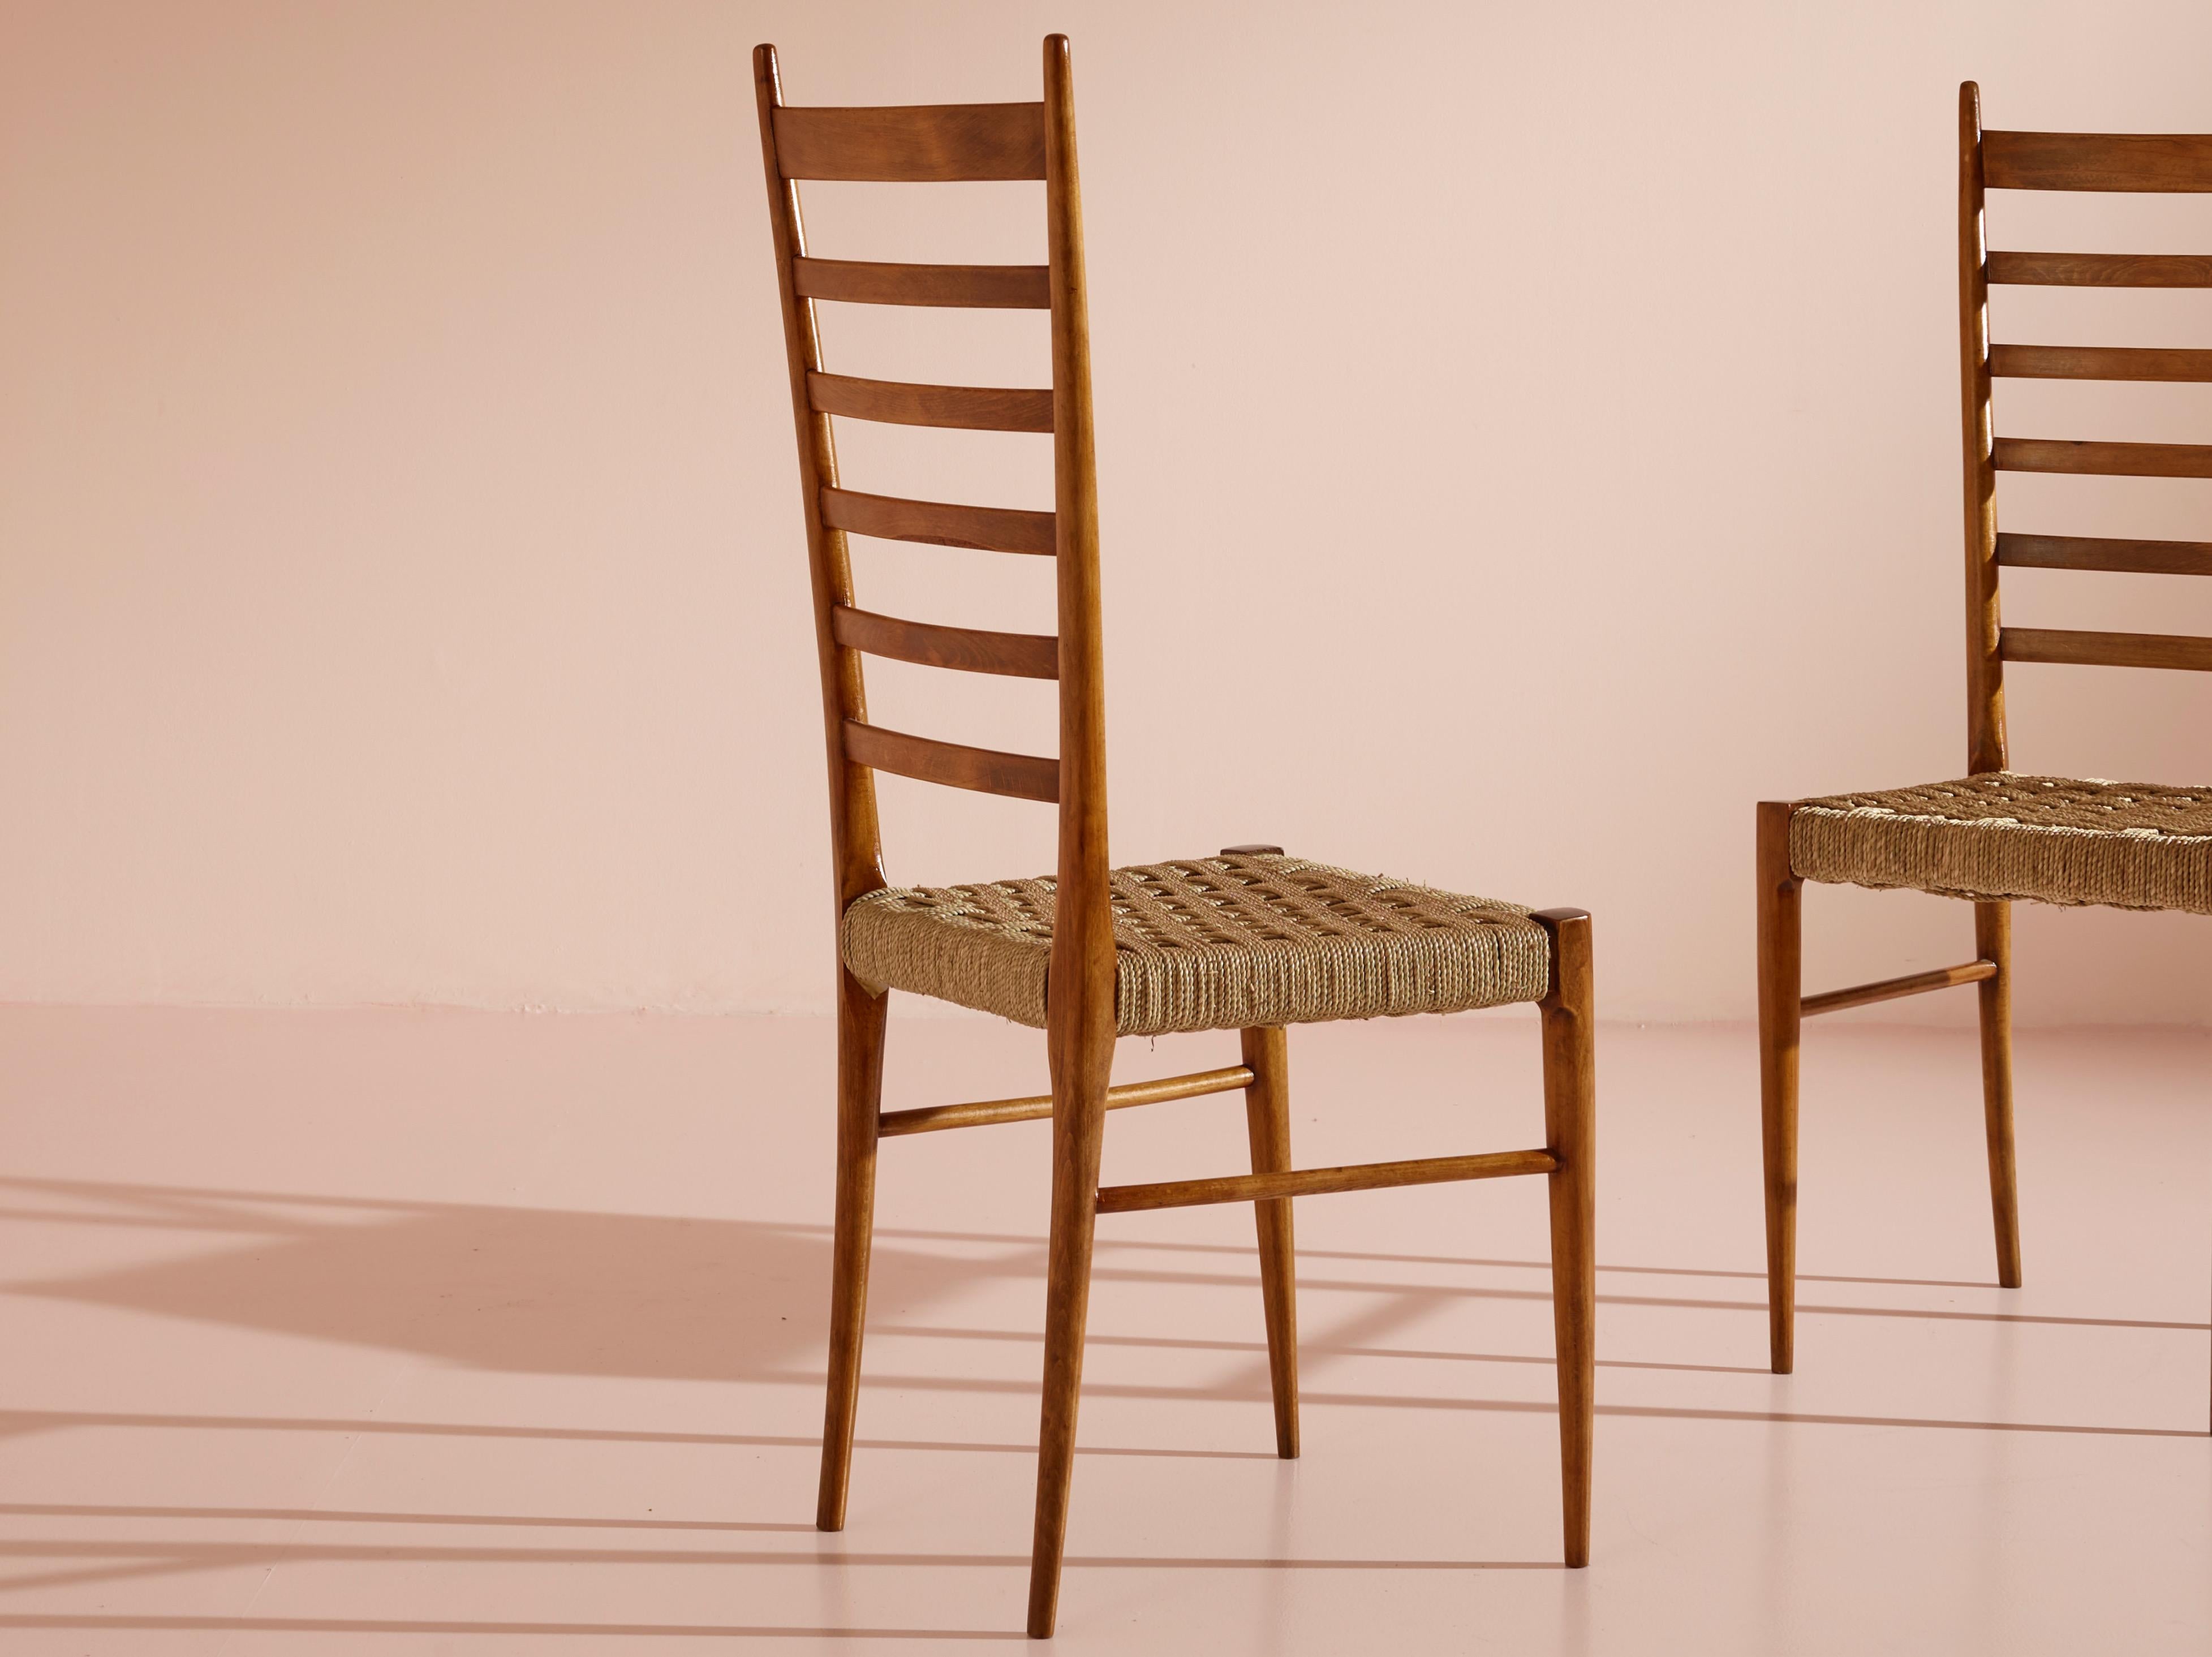 Colombo Sanguineti set of two ''Sei Stecche'' chairs, Chiavari, Italy, 1950s For Sale 5